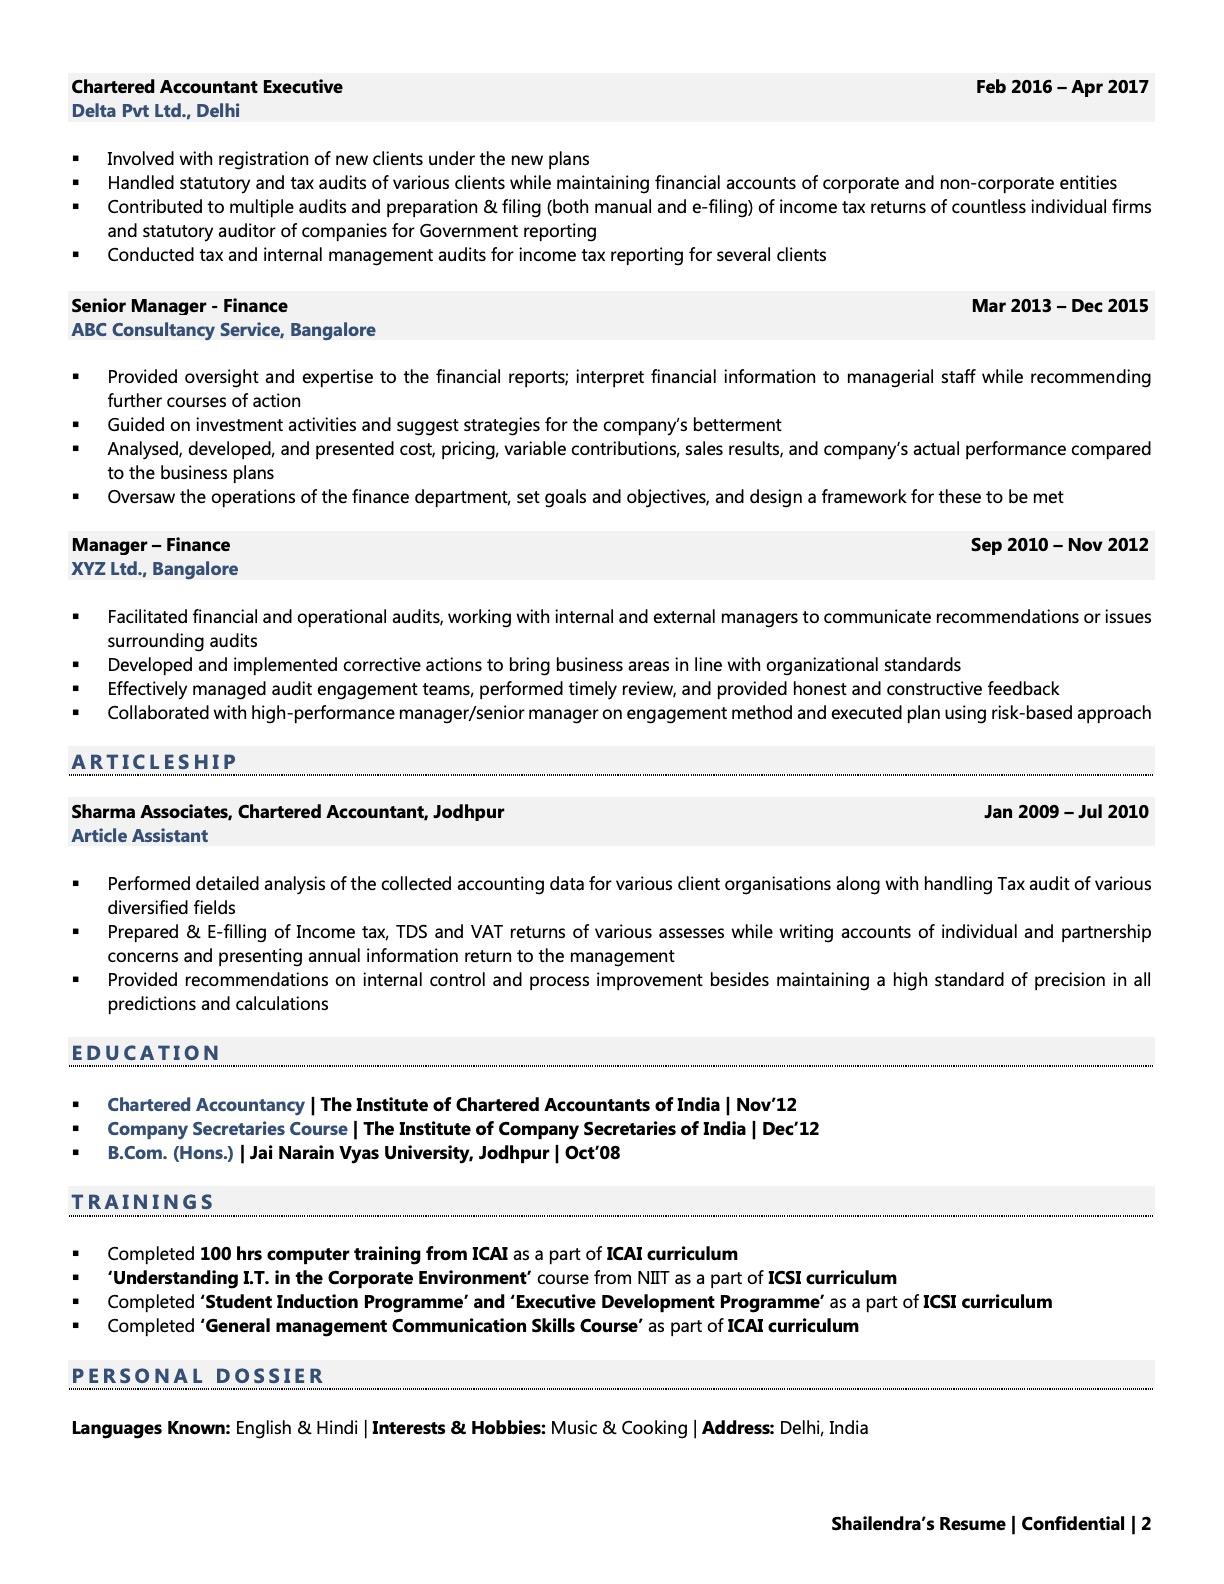 Chartered Accountant (CA) Resume Examples & Template (with job winning